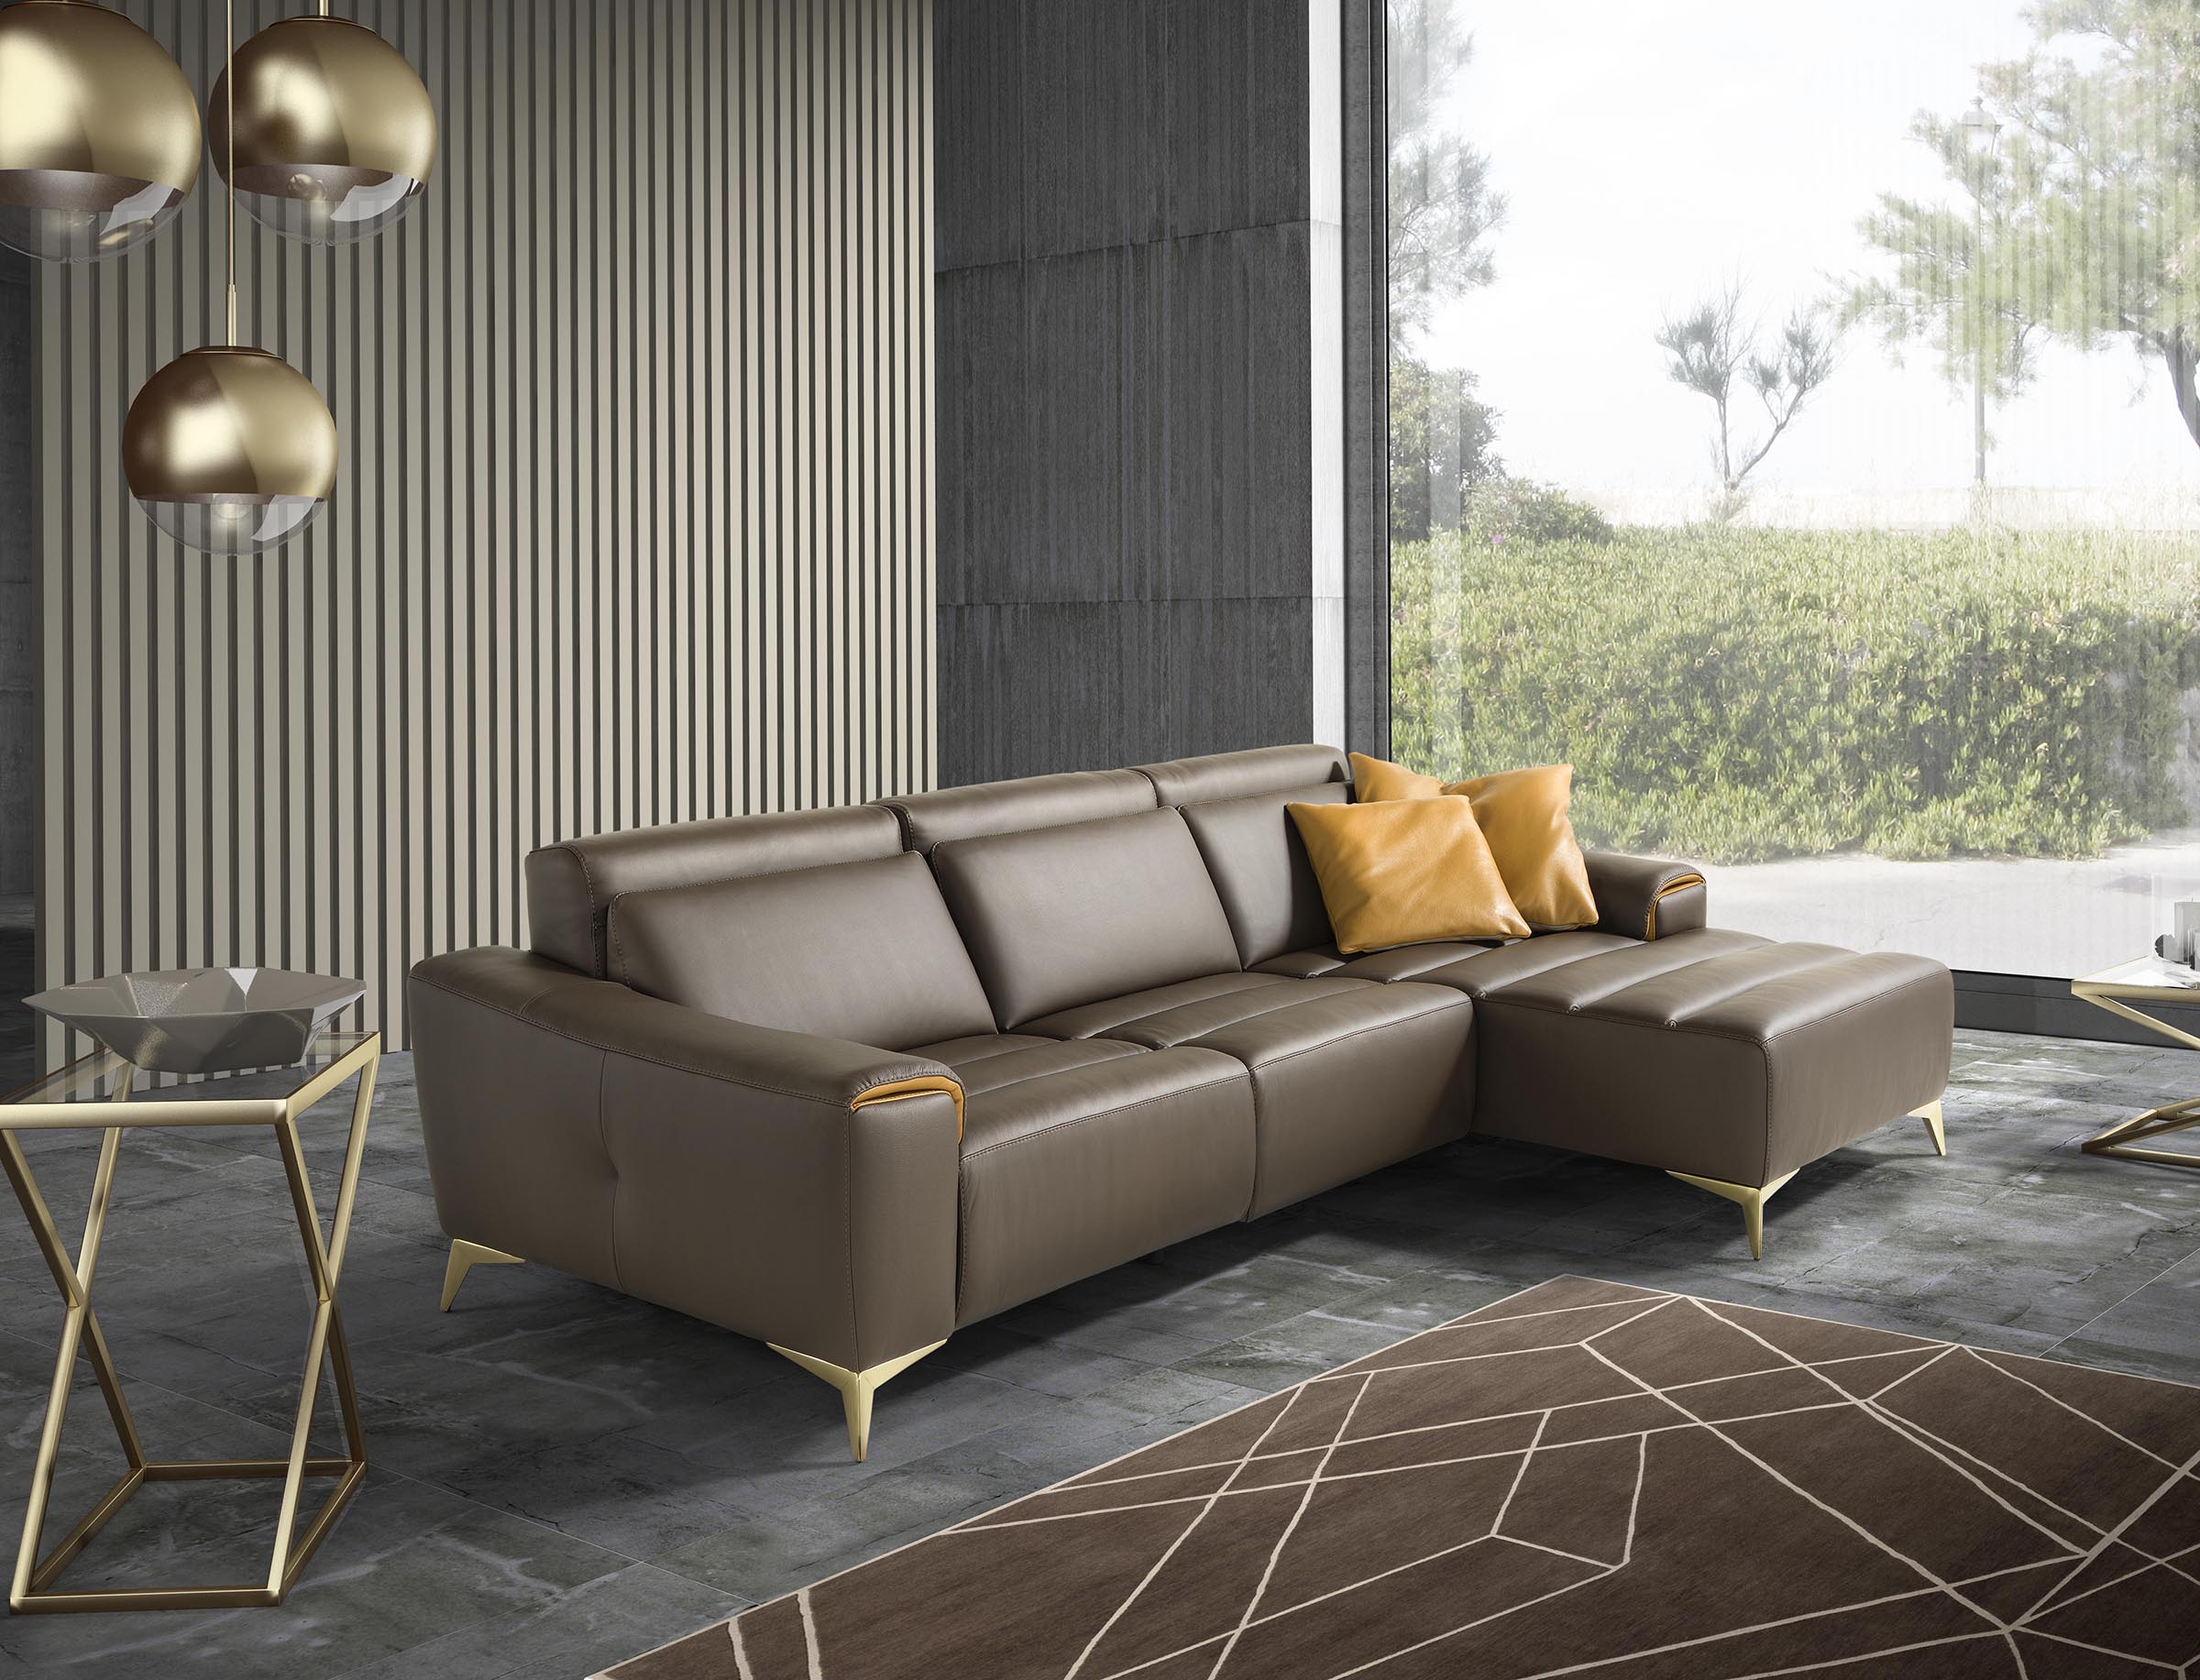 Suzette sofa with chaise